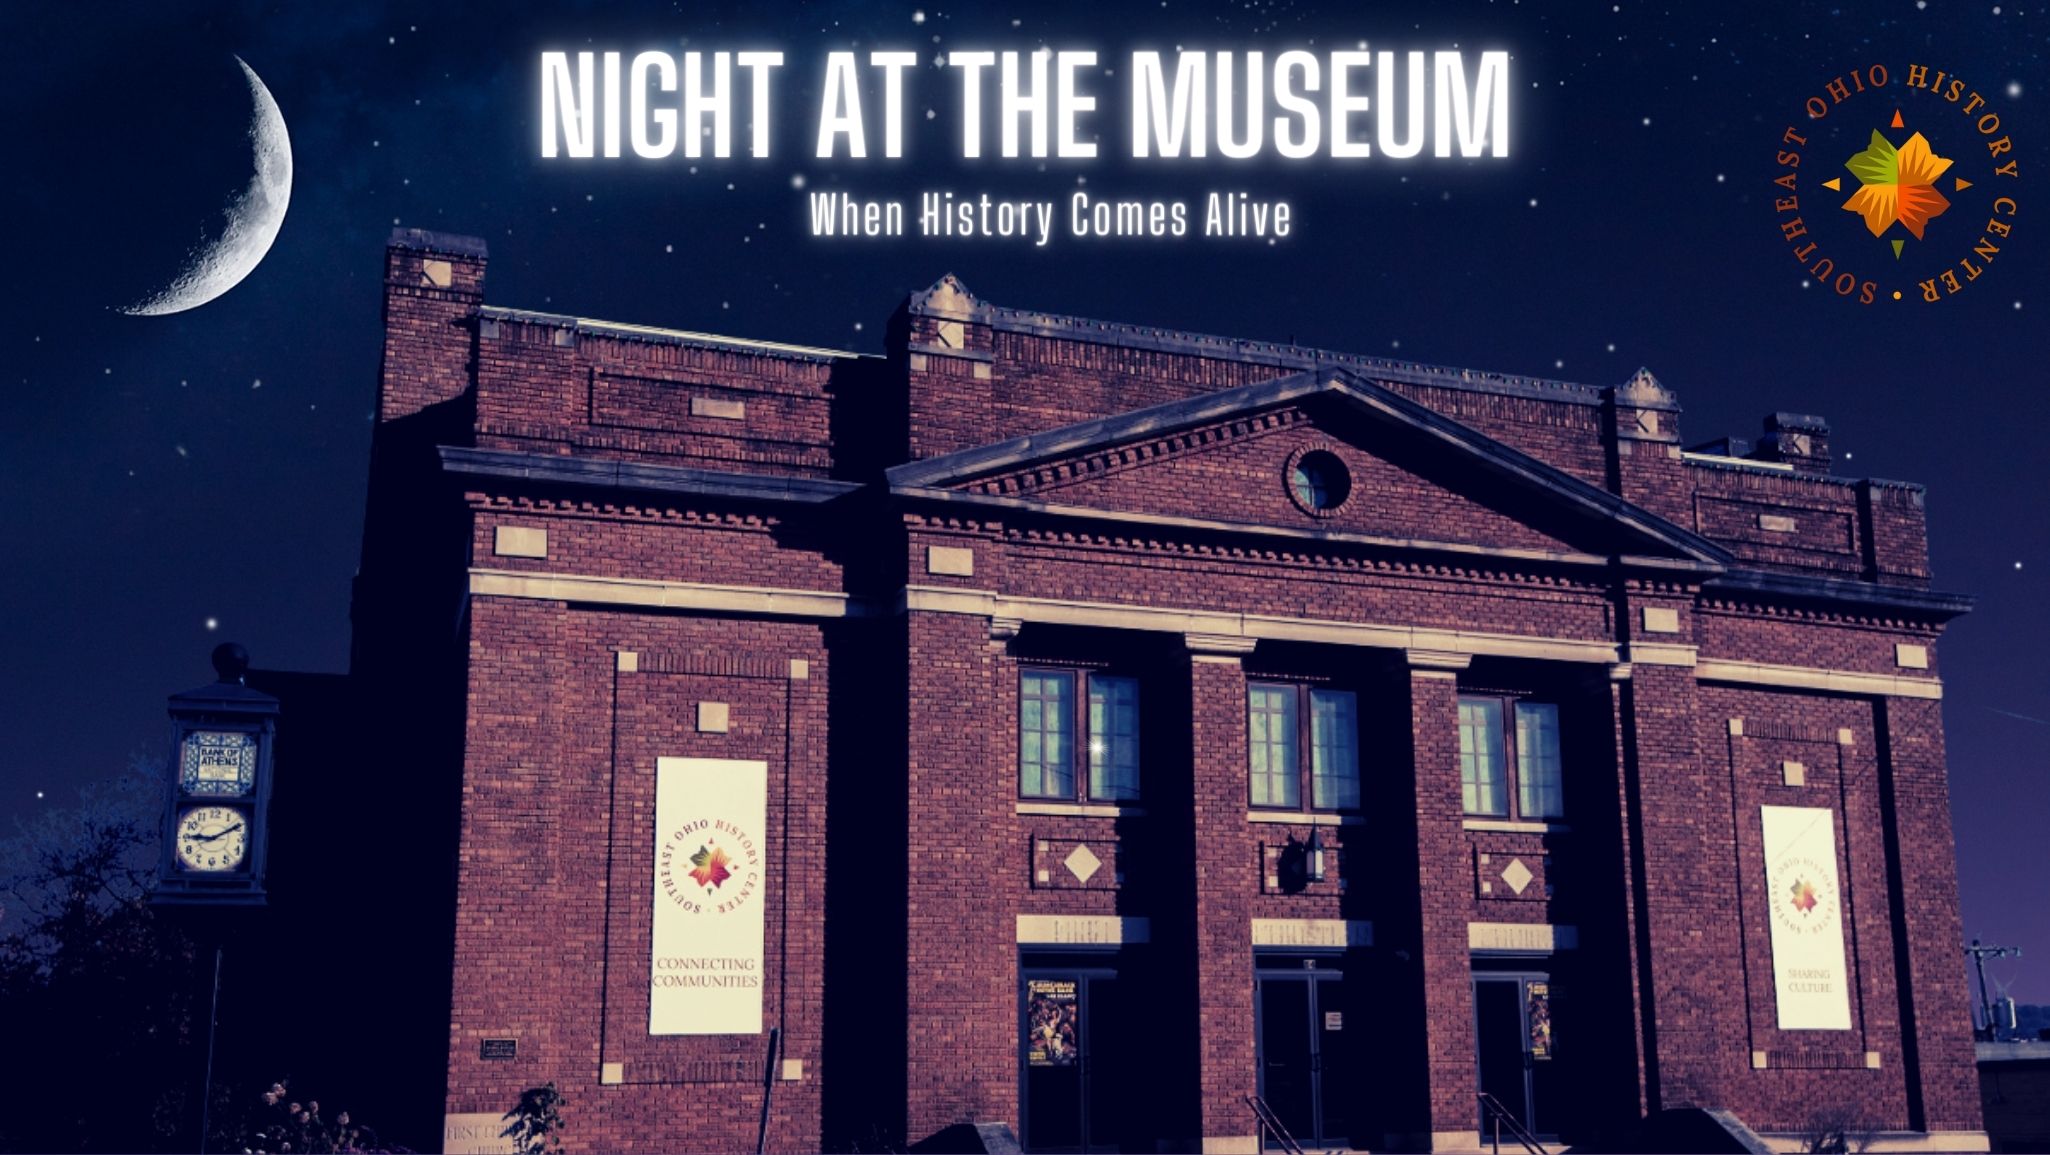 An image of the Southeast Ohio History Center with text reading "Night at the Museum" over it.